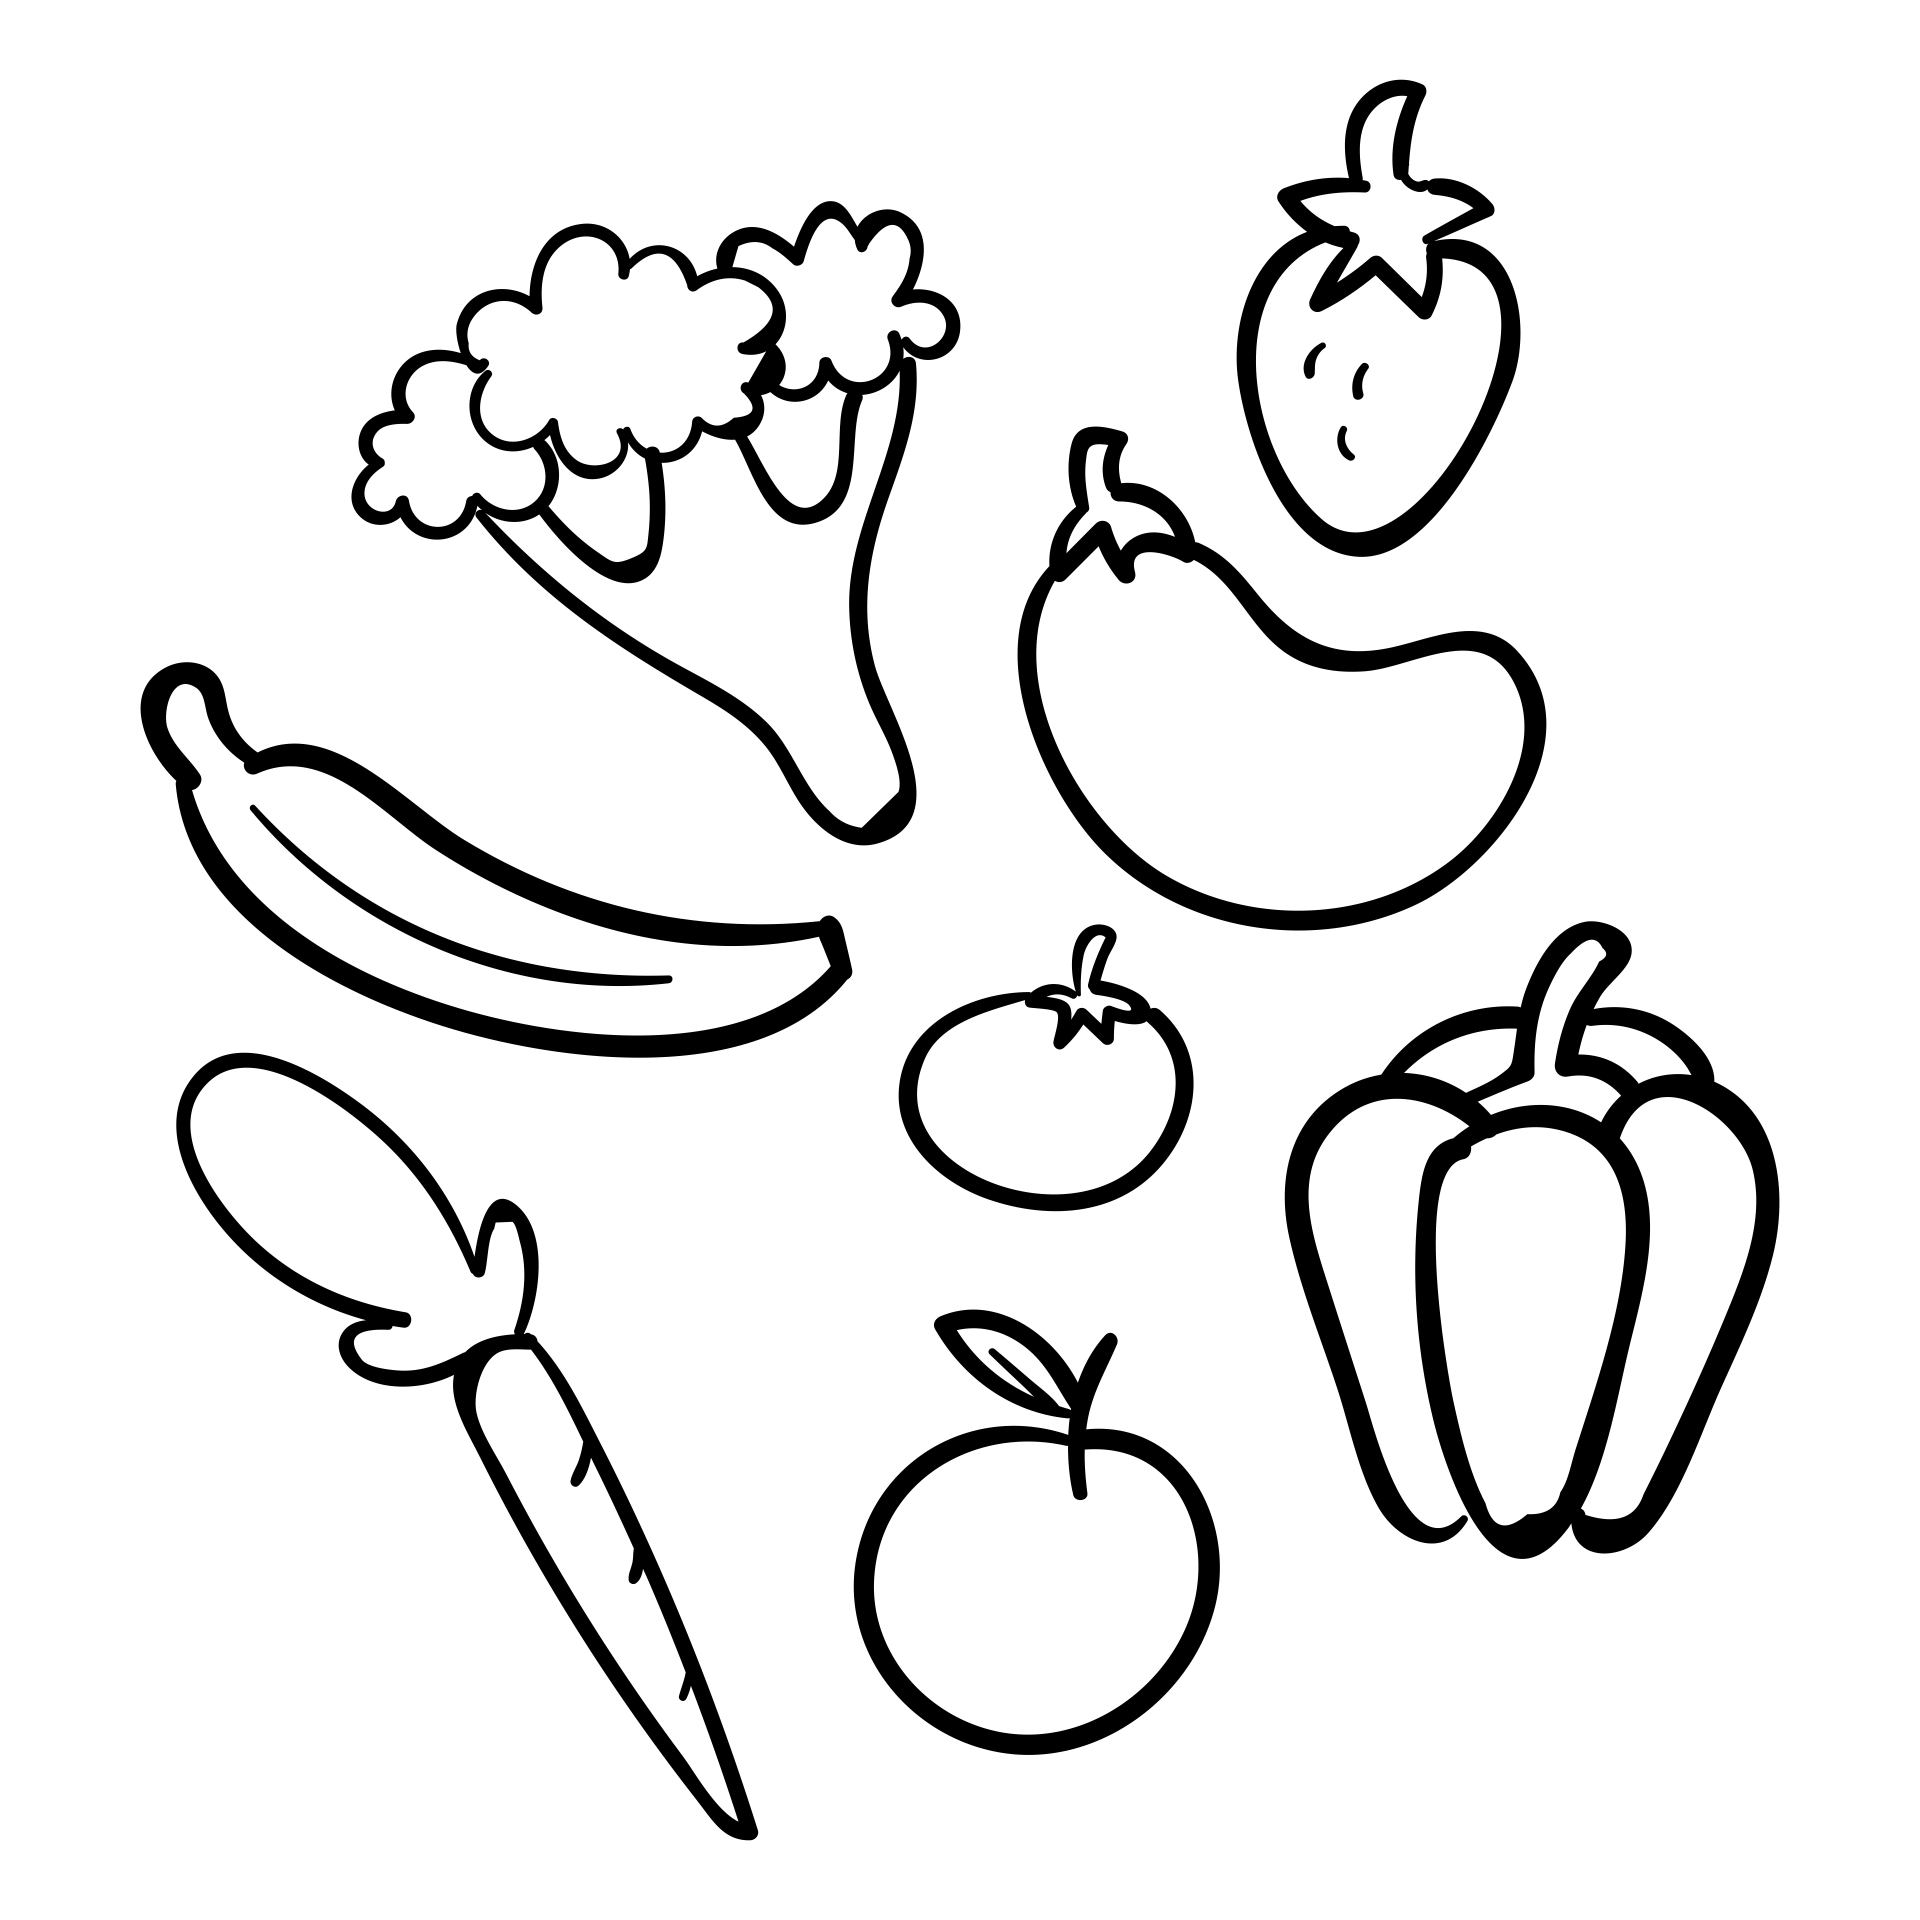 10 Best Free Printable Fruit And Vegetable Templates PDF For Free At Printablee